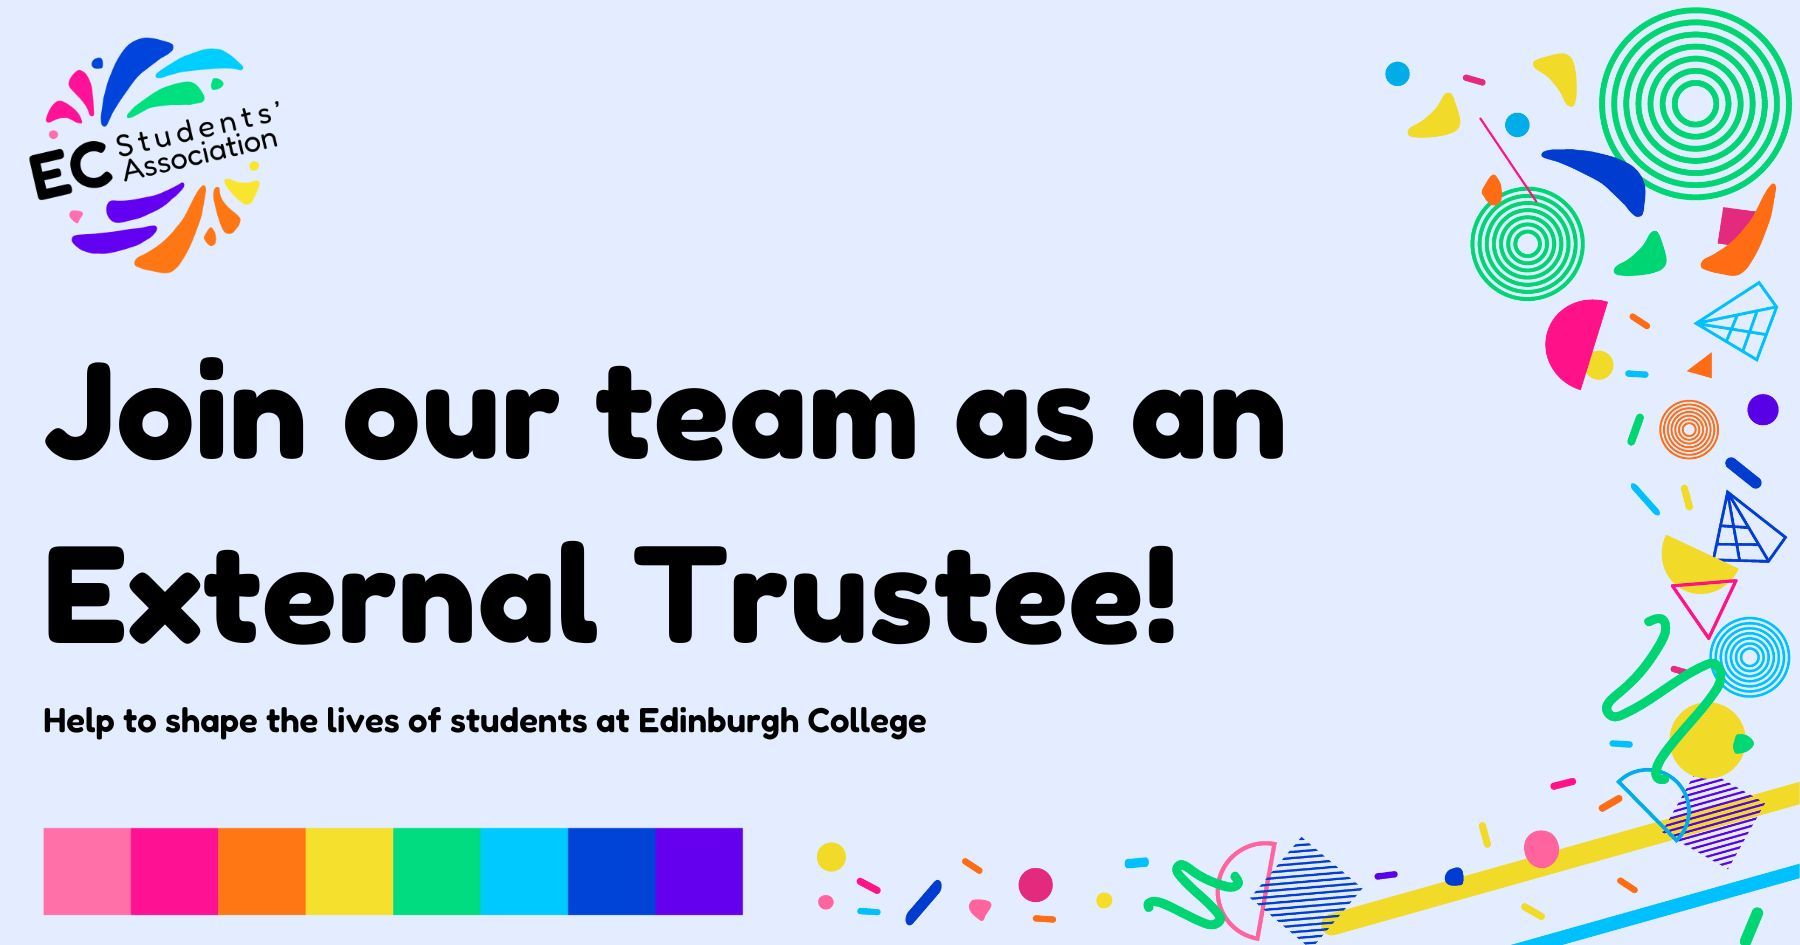 Join our team as an External Trustee and help to shape the lives of students at Edinburgh College